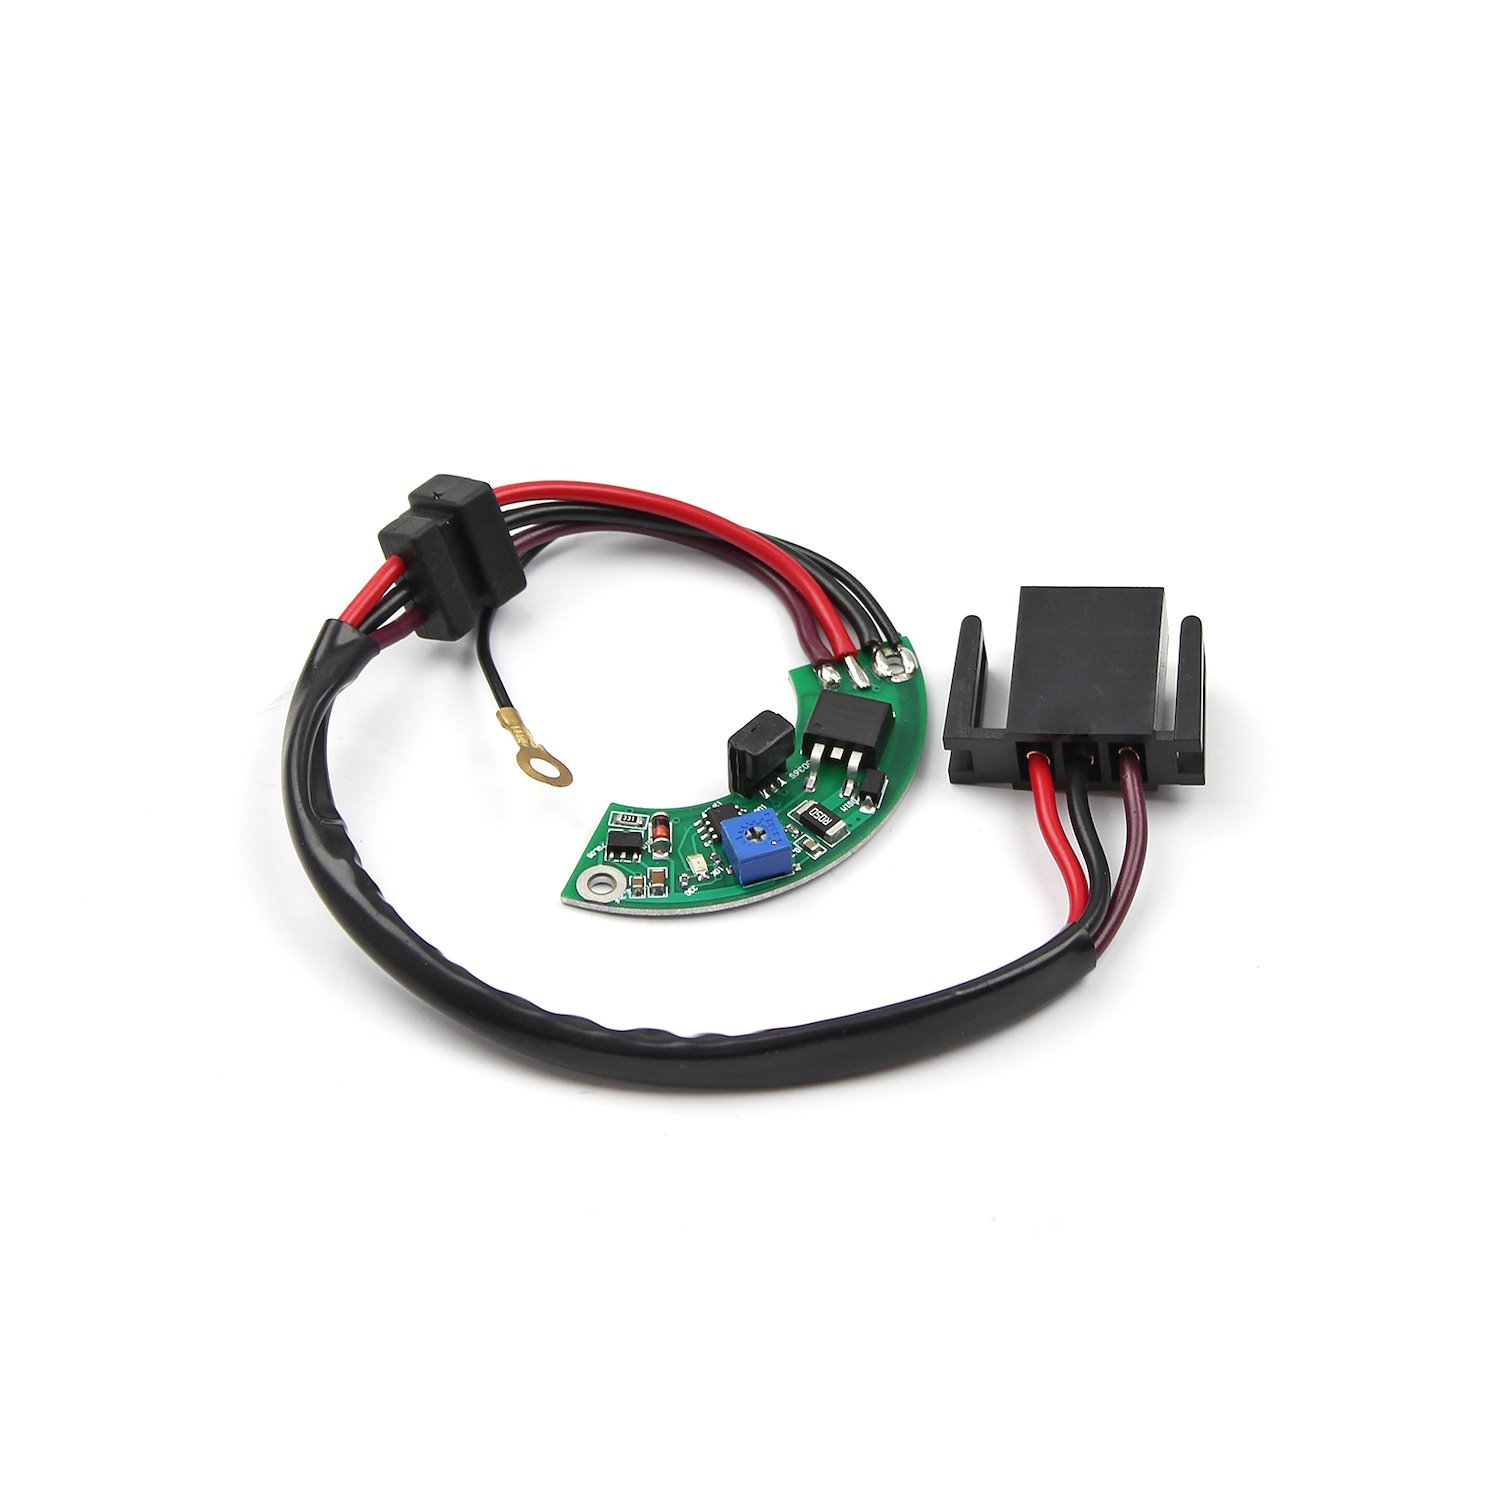 Pro HEI -RPM- Replacement Ignition Module Suits New 6000 Series